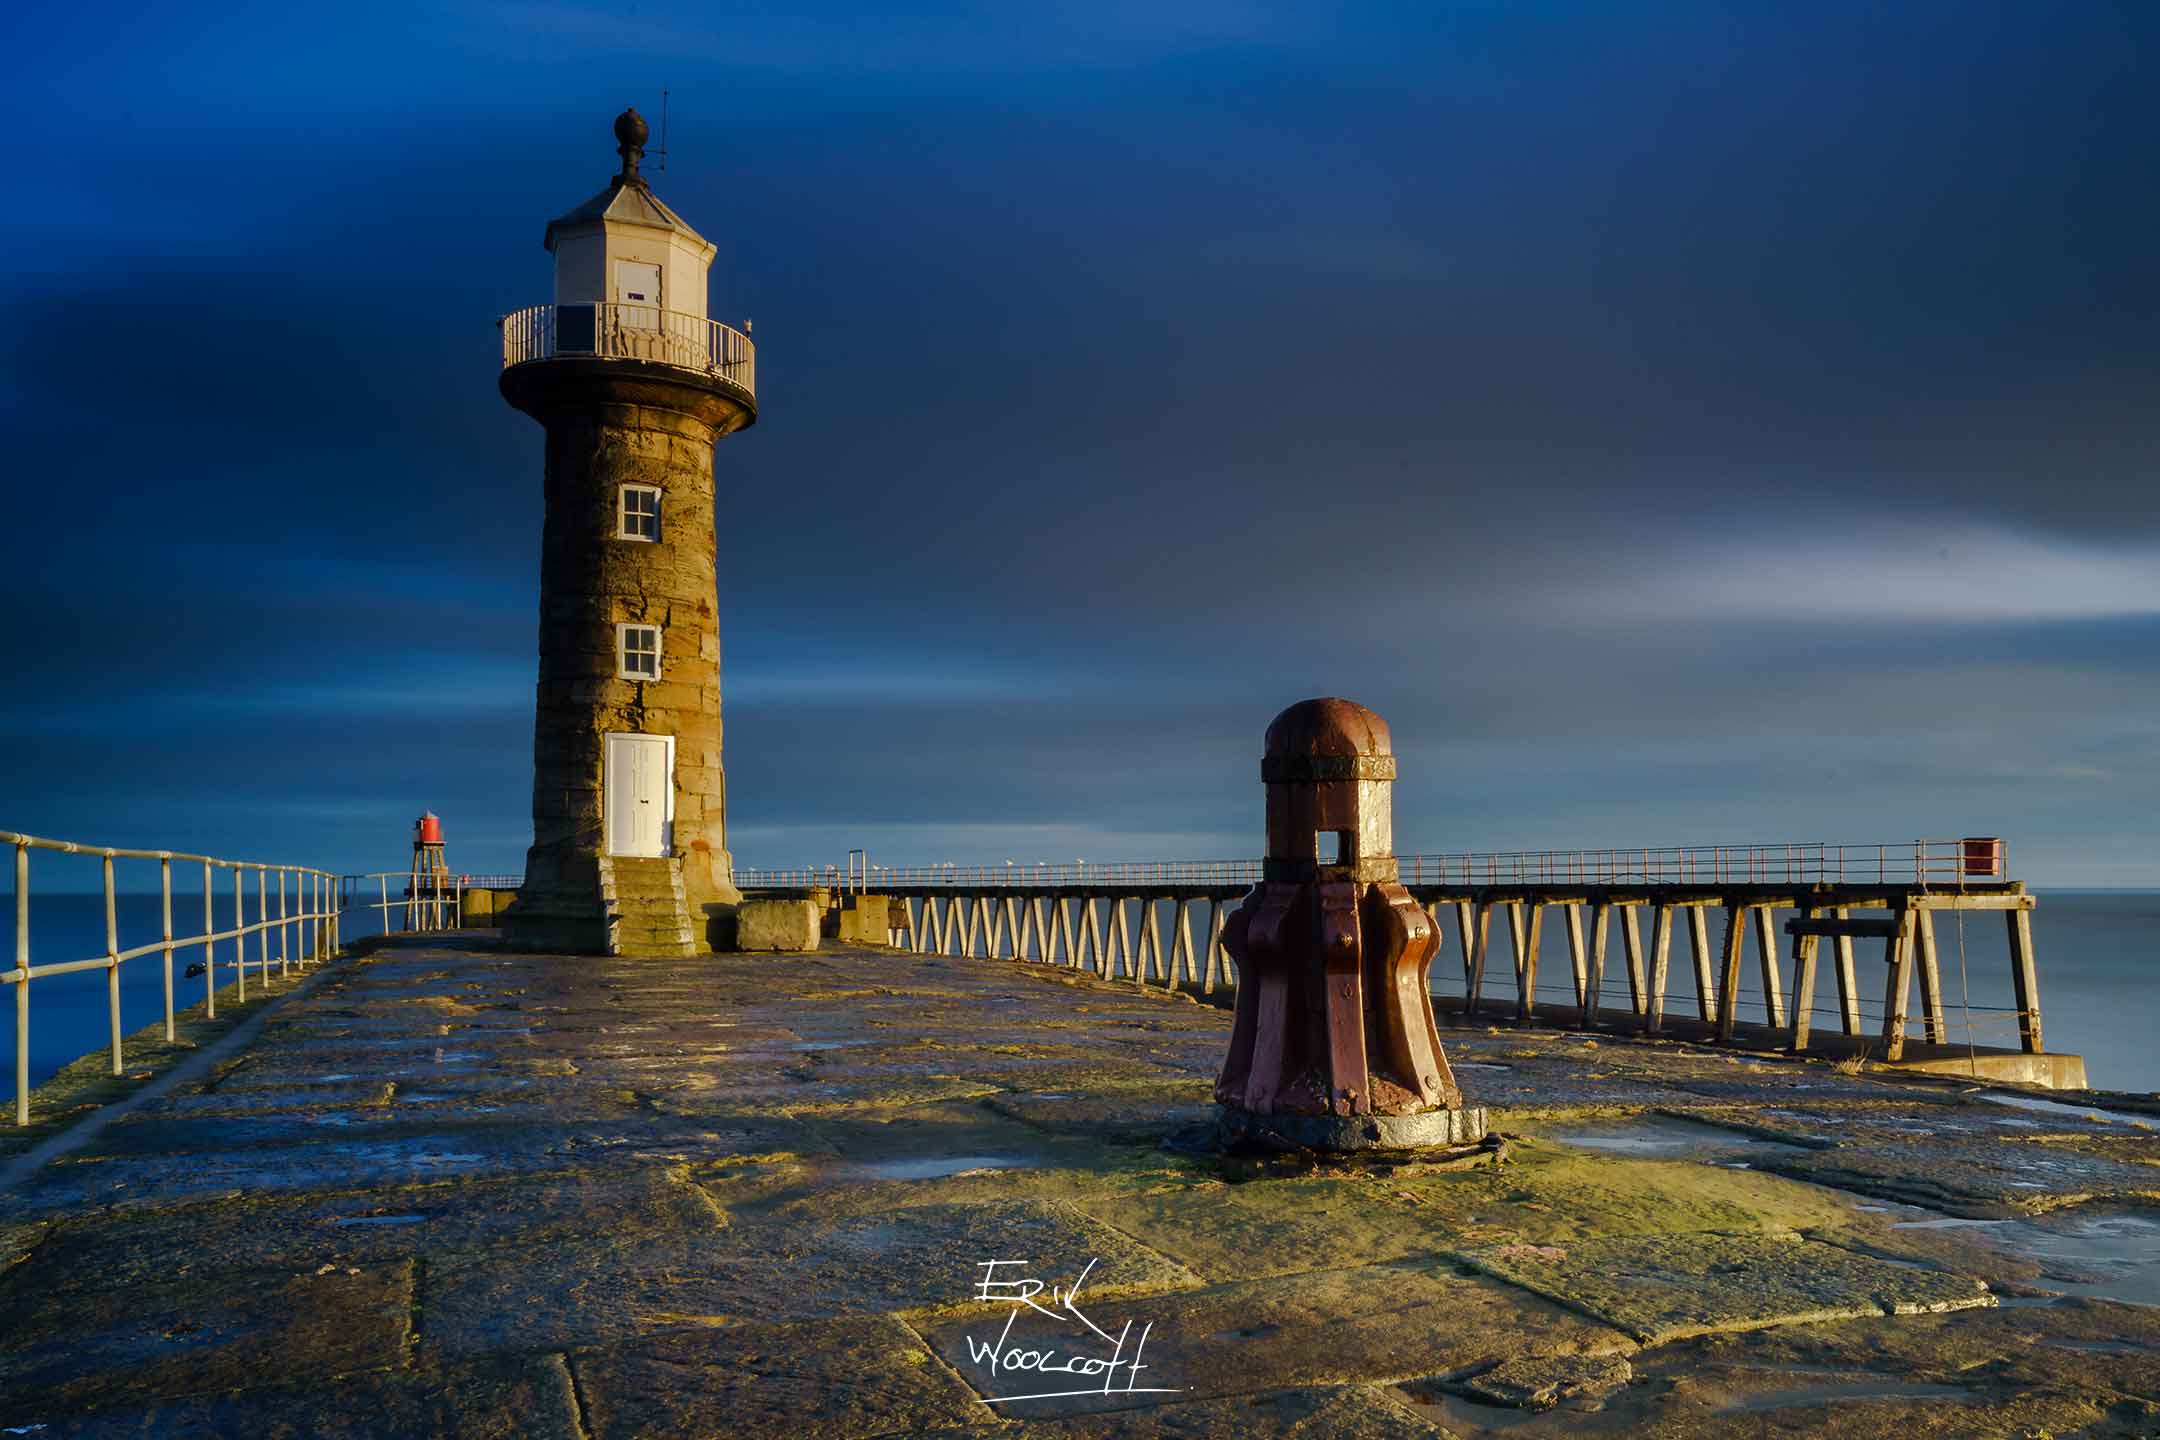 Whitby Lighthouse